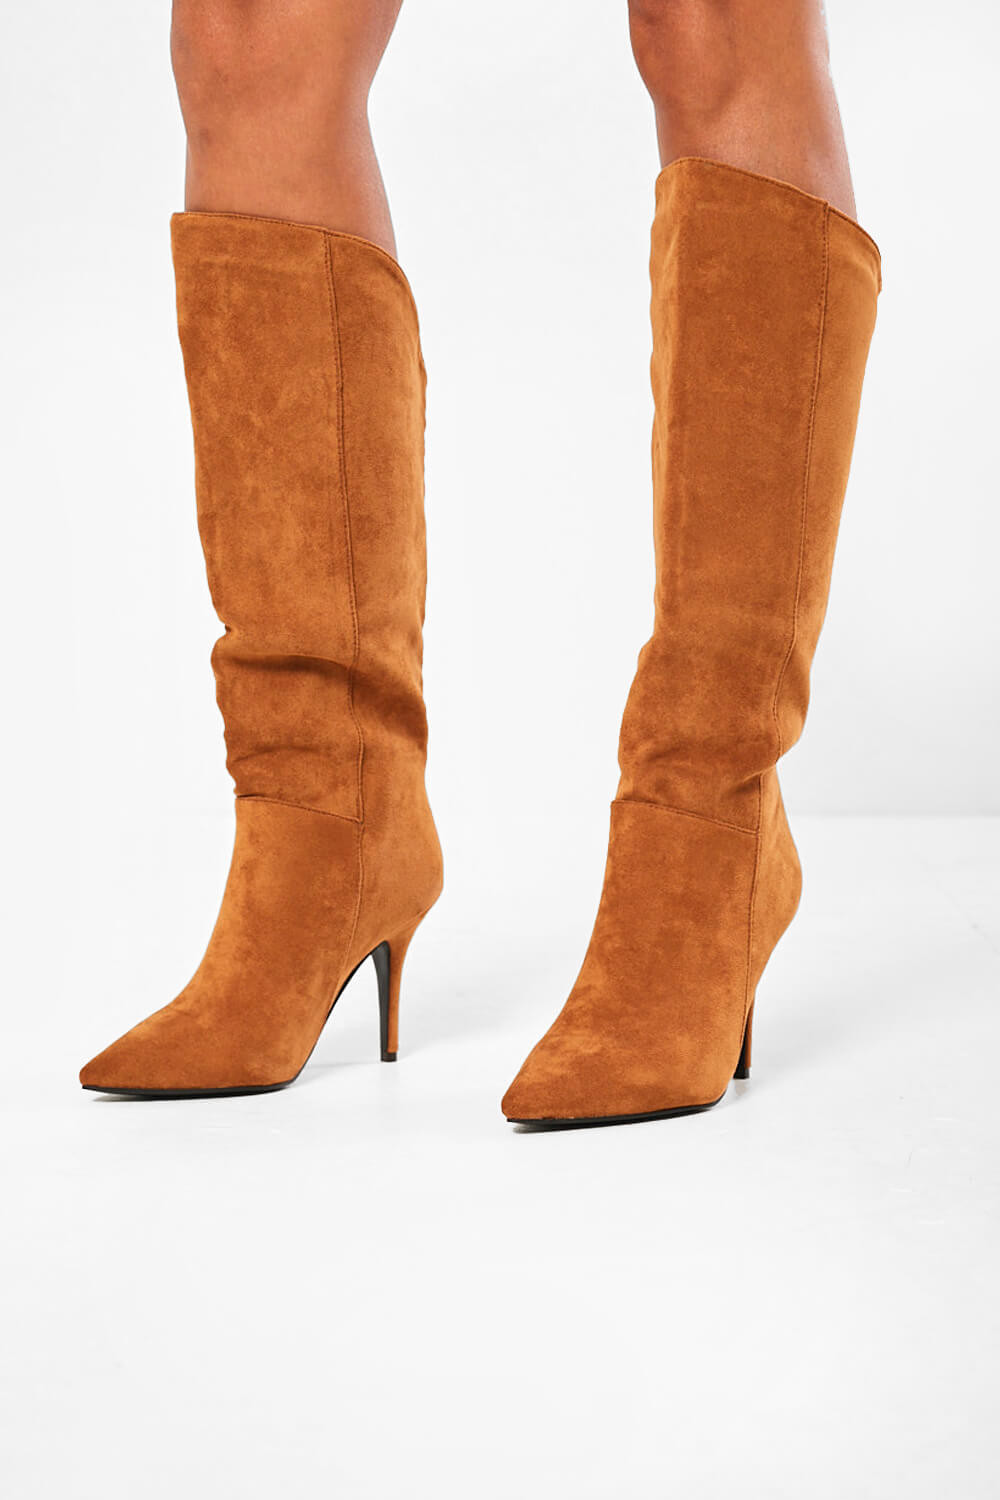 No Doubt Jasper Suede Knee High Boots in Camel | iCLOTHING